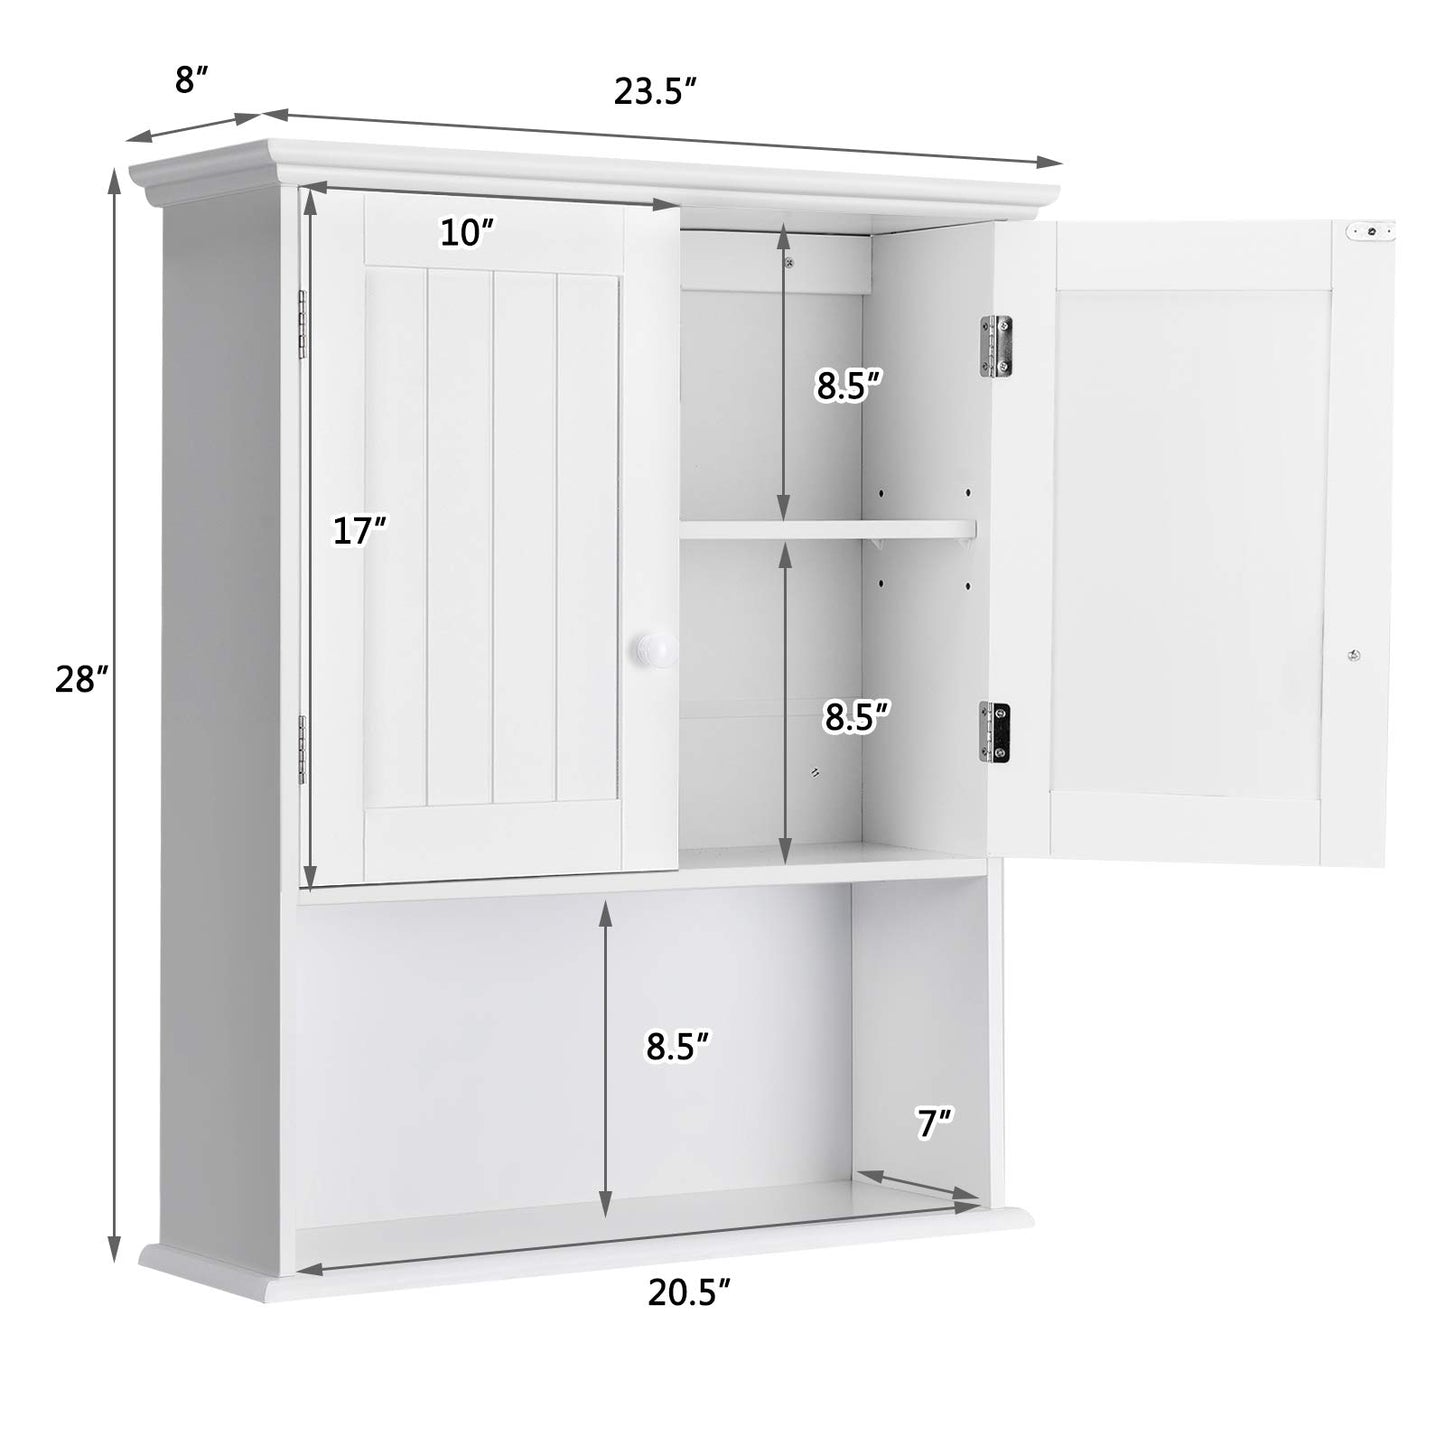 COSTWAY Wall Mounted Bathroom Cabinet, Over The Toilet Storage Cabinet w/Double Doors & Adjustable Shelf, Wood Hanging Medicine Cabinet for Living